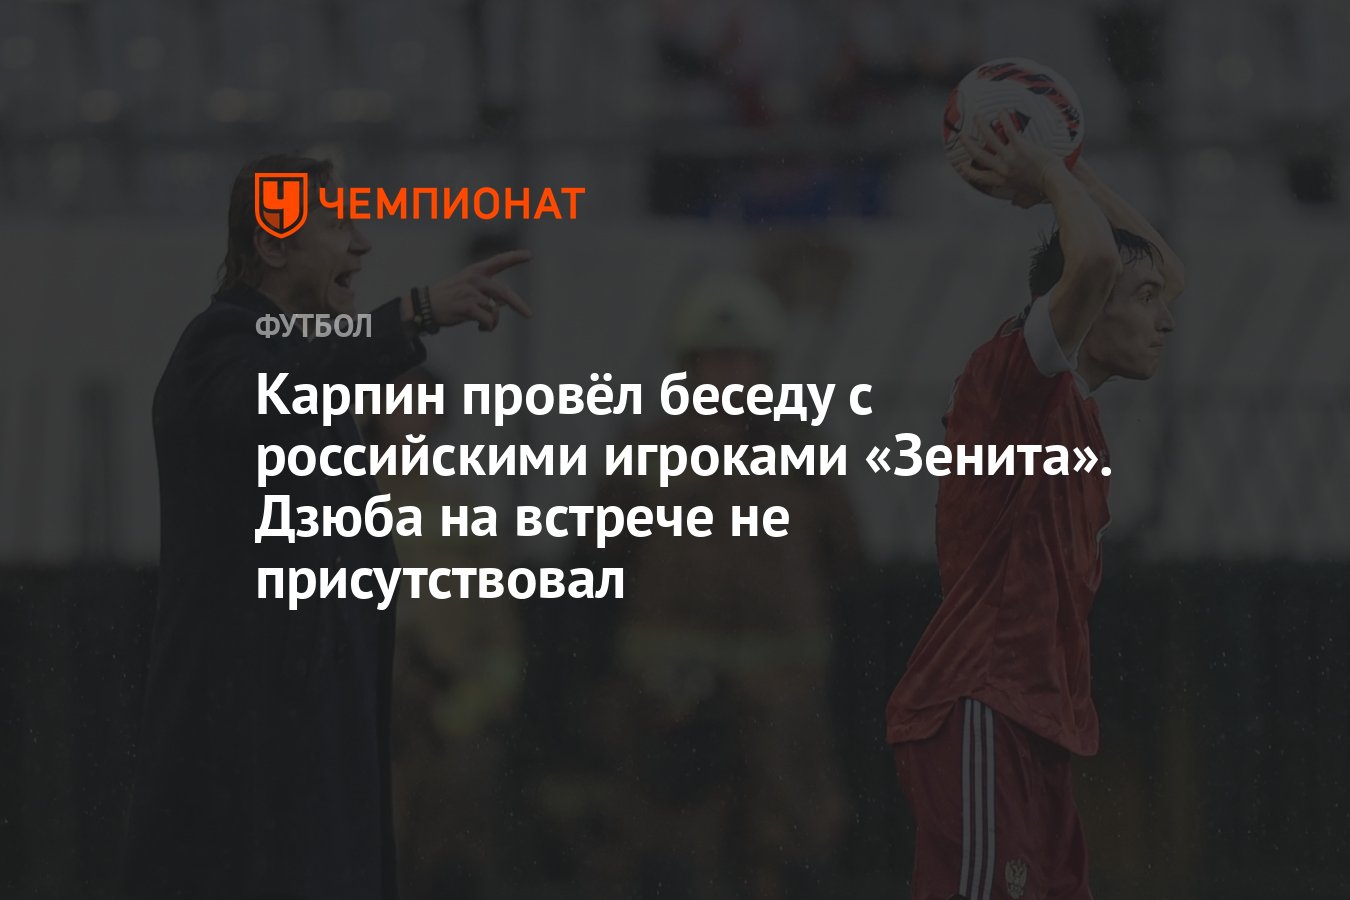 Karpin had a conversation with the Russian players of Zenit.  Dzyuba was not present at the meeting thumbnail